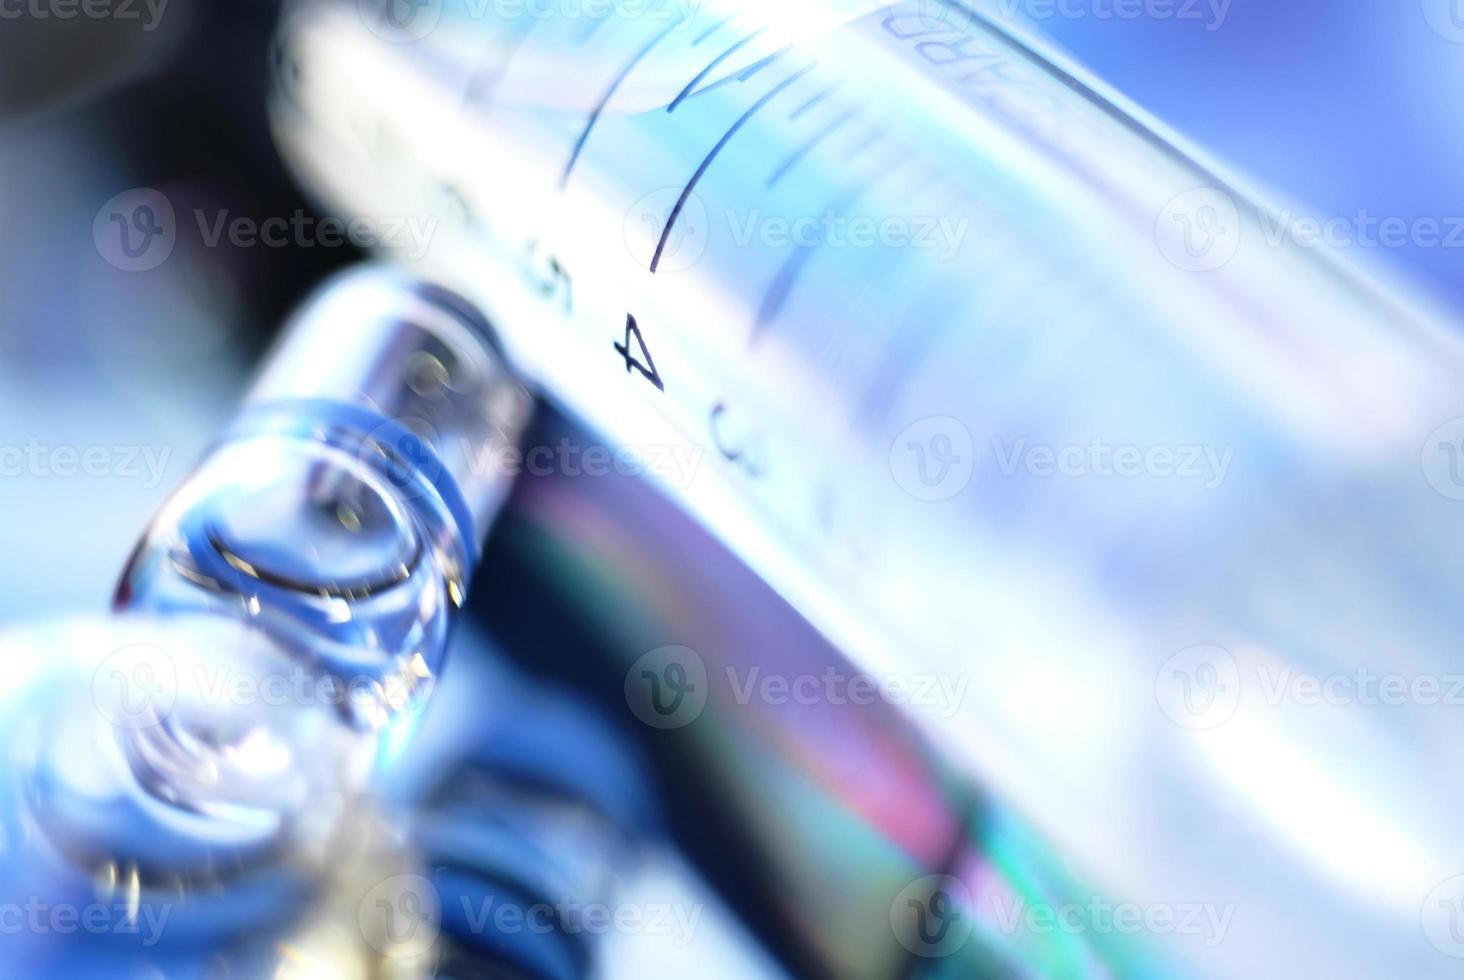 A close p blurry image of an syringe and an ampule photo